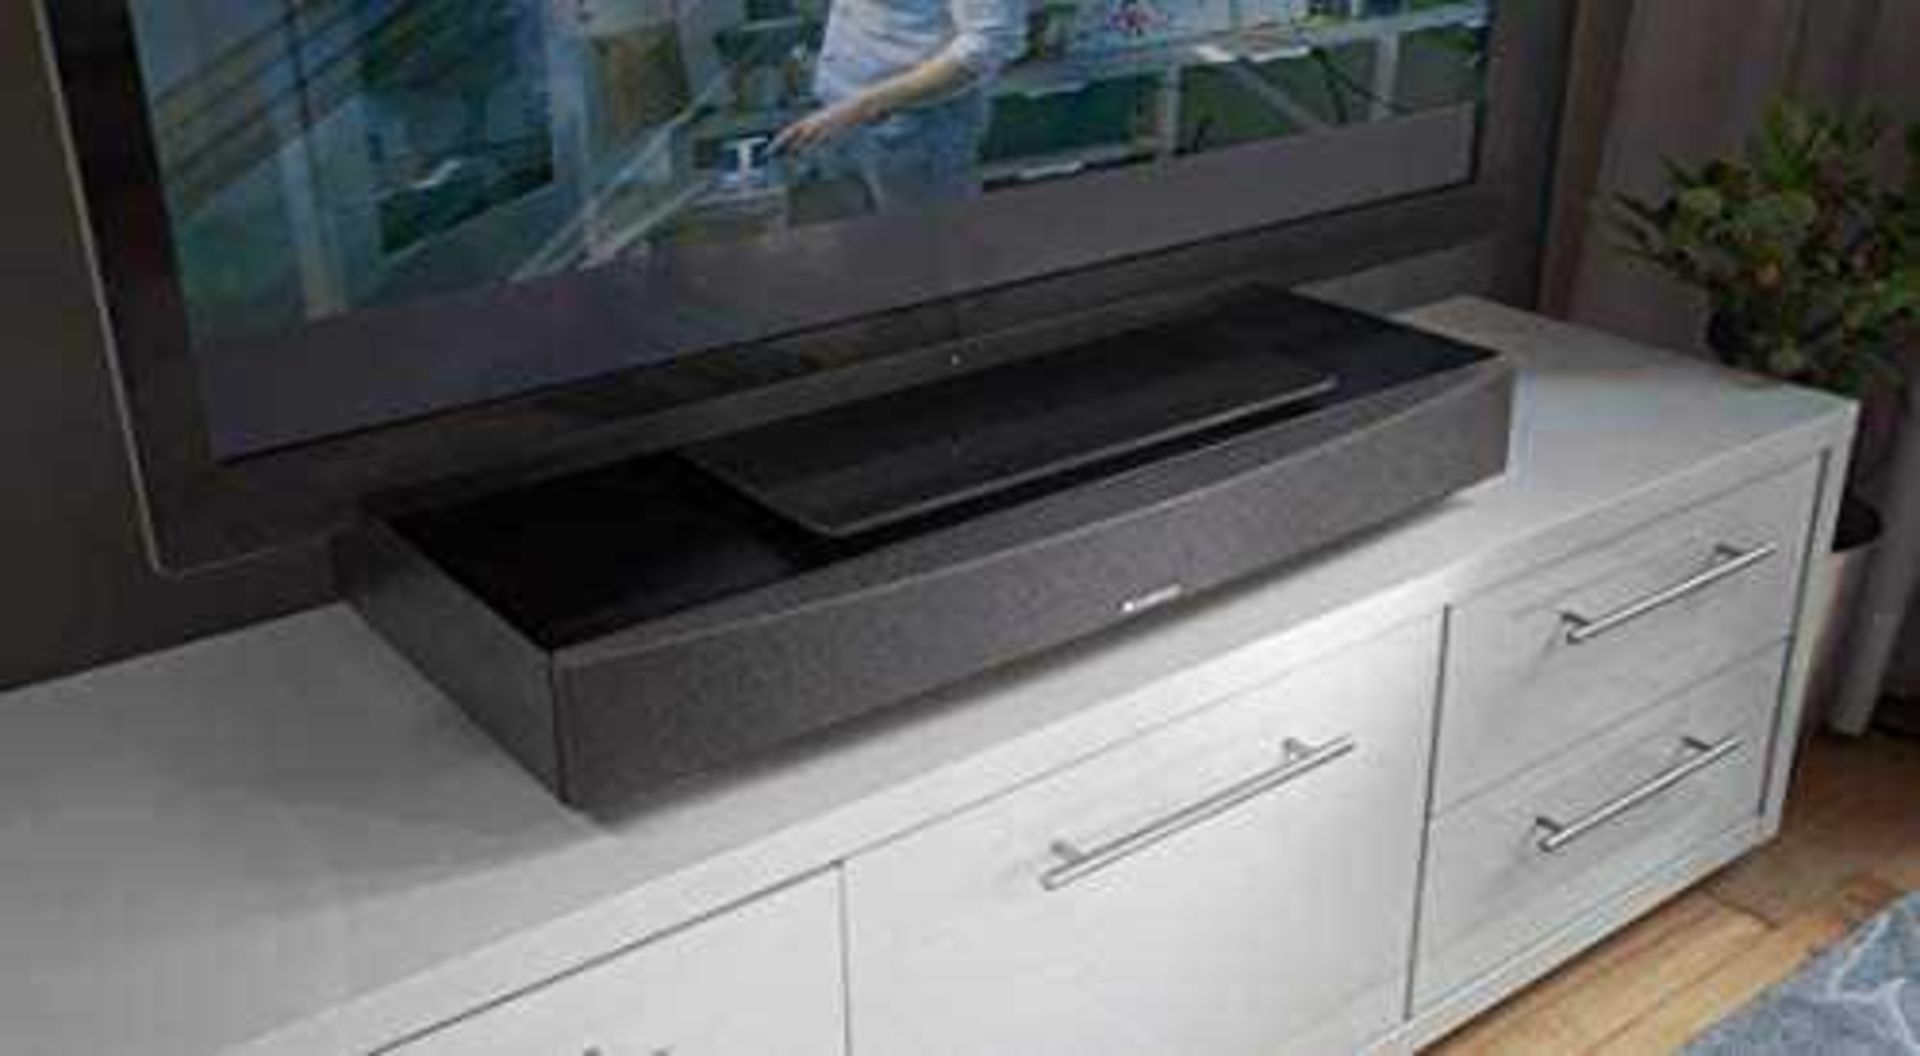 Rrp £250 Boxed Cambridge Audio Tv5 V2 Tv Speaker Base With Bluetooth (Tested & Working) - Image 3 of 4